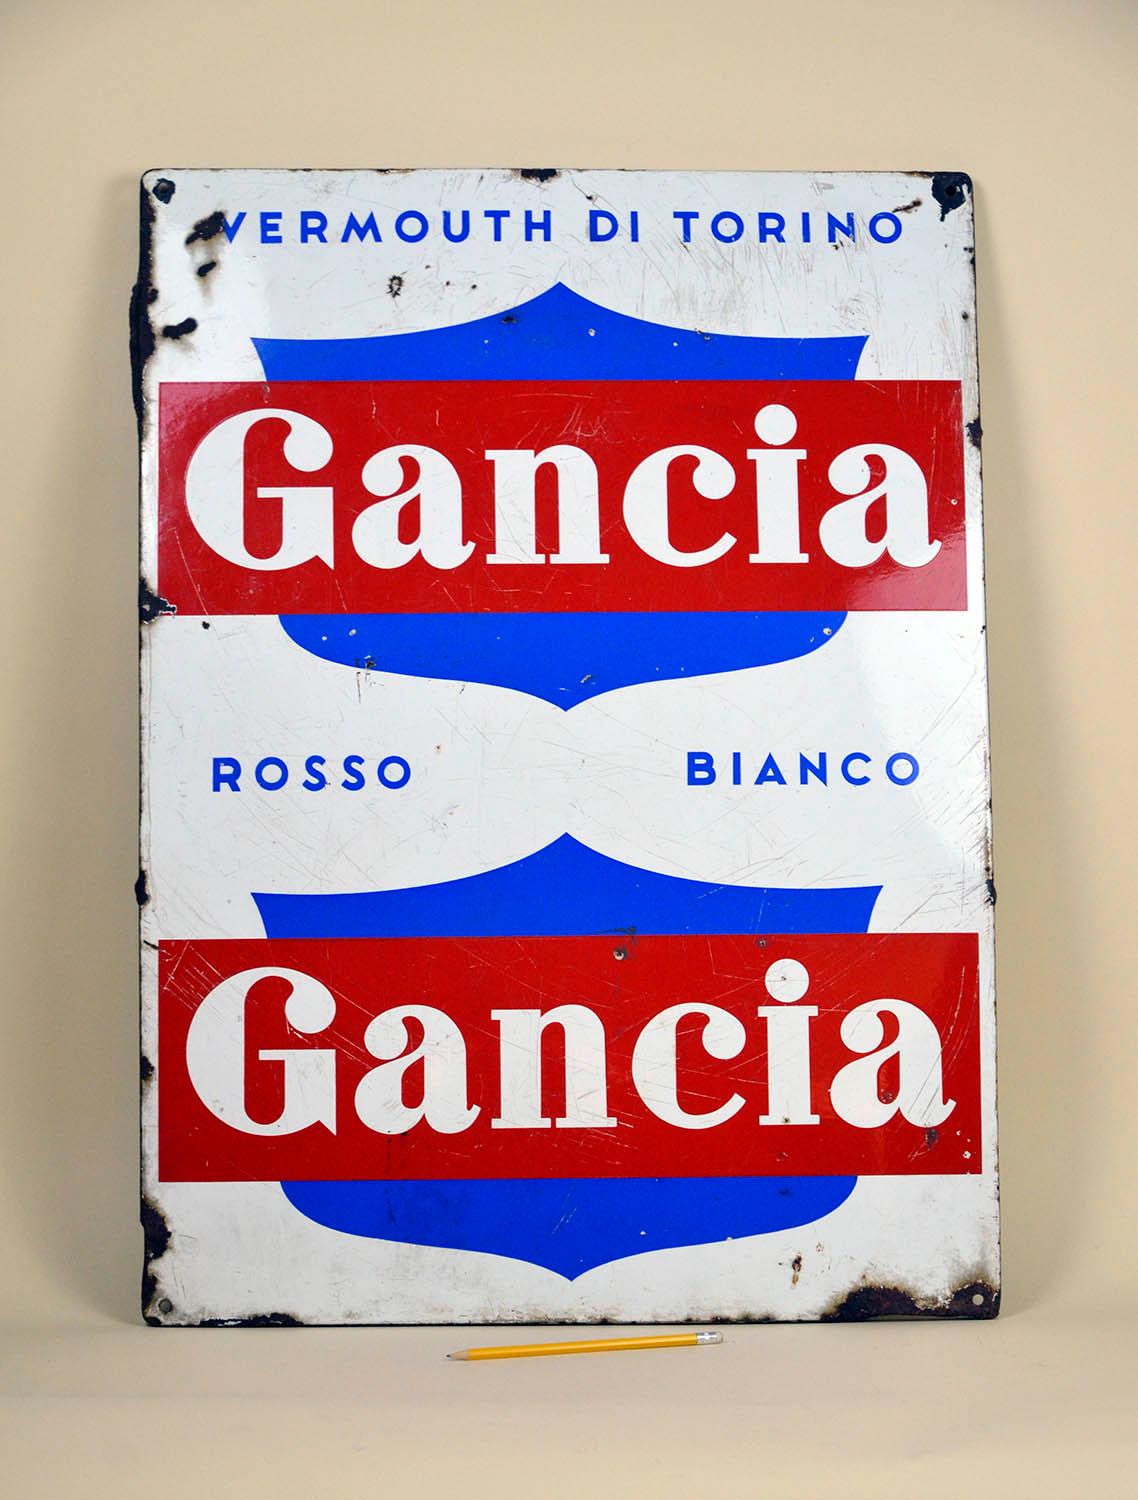 1960s enamel metal Gancia Vermouth sign with minor losses.
The sign present the company slogan 